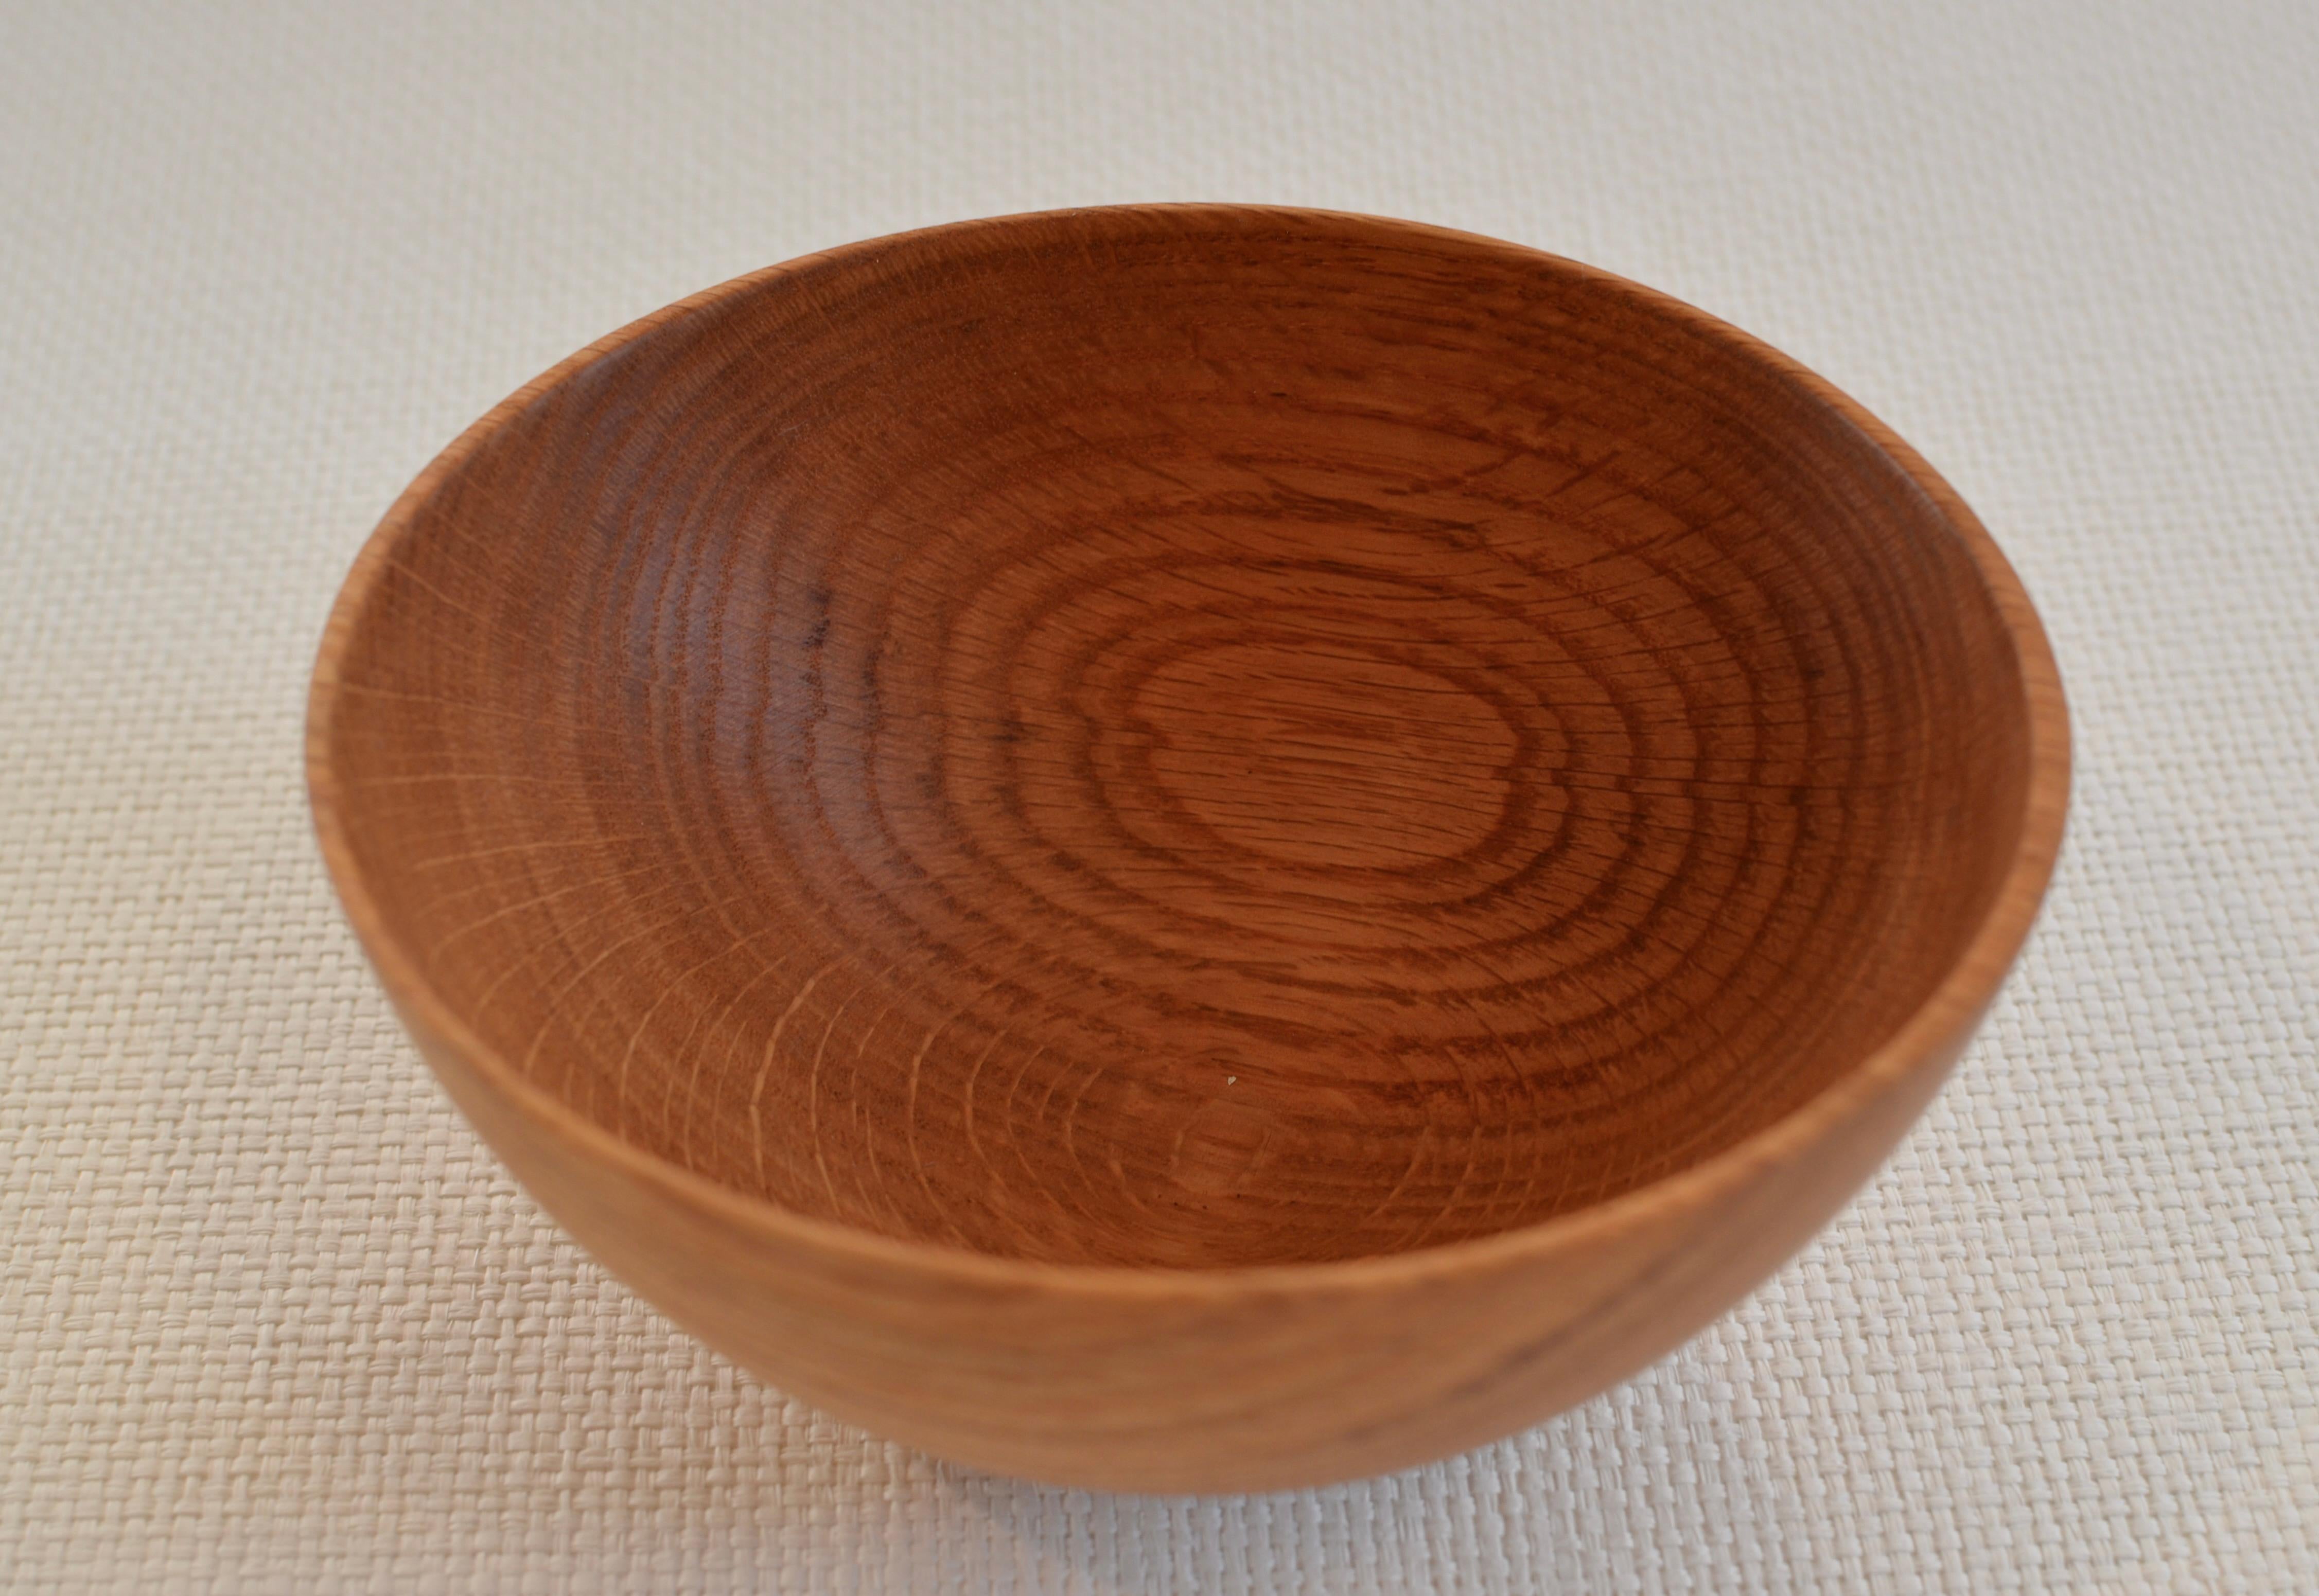 Hand-carved, Red Oak wood bowl with natural grain. Created using wood only from fallen Oak trees. One of a kind.